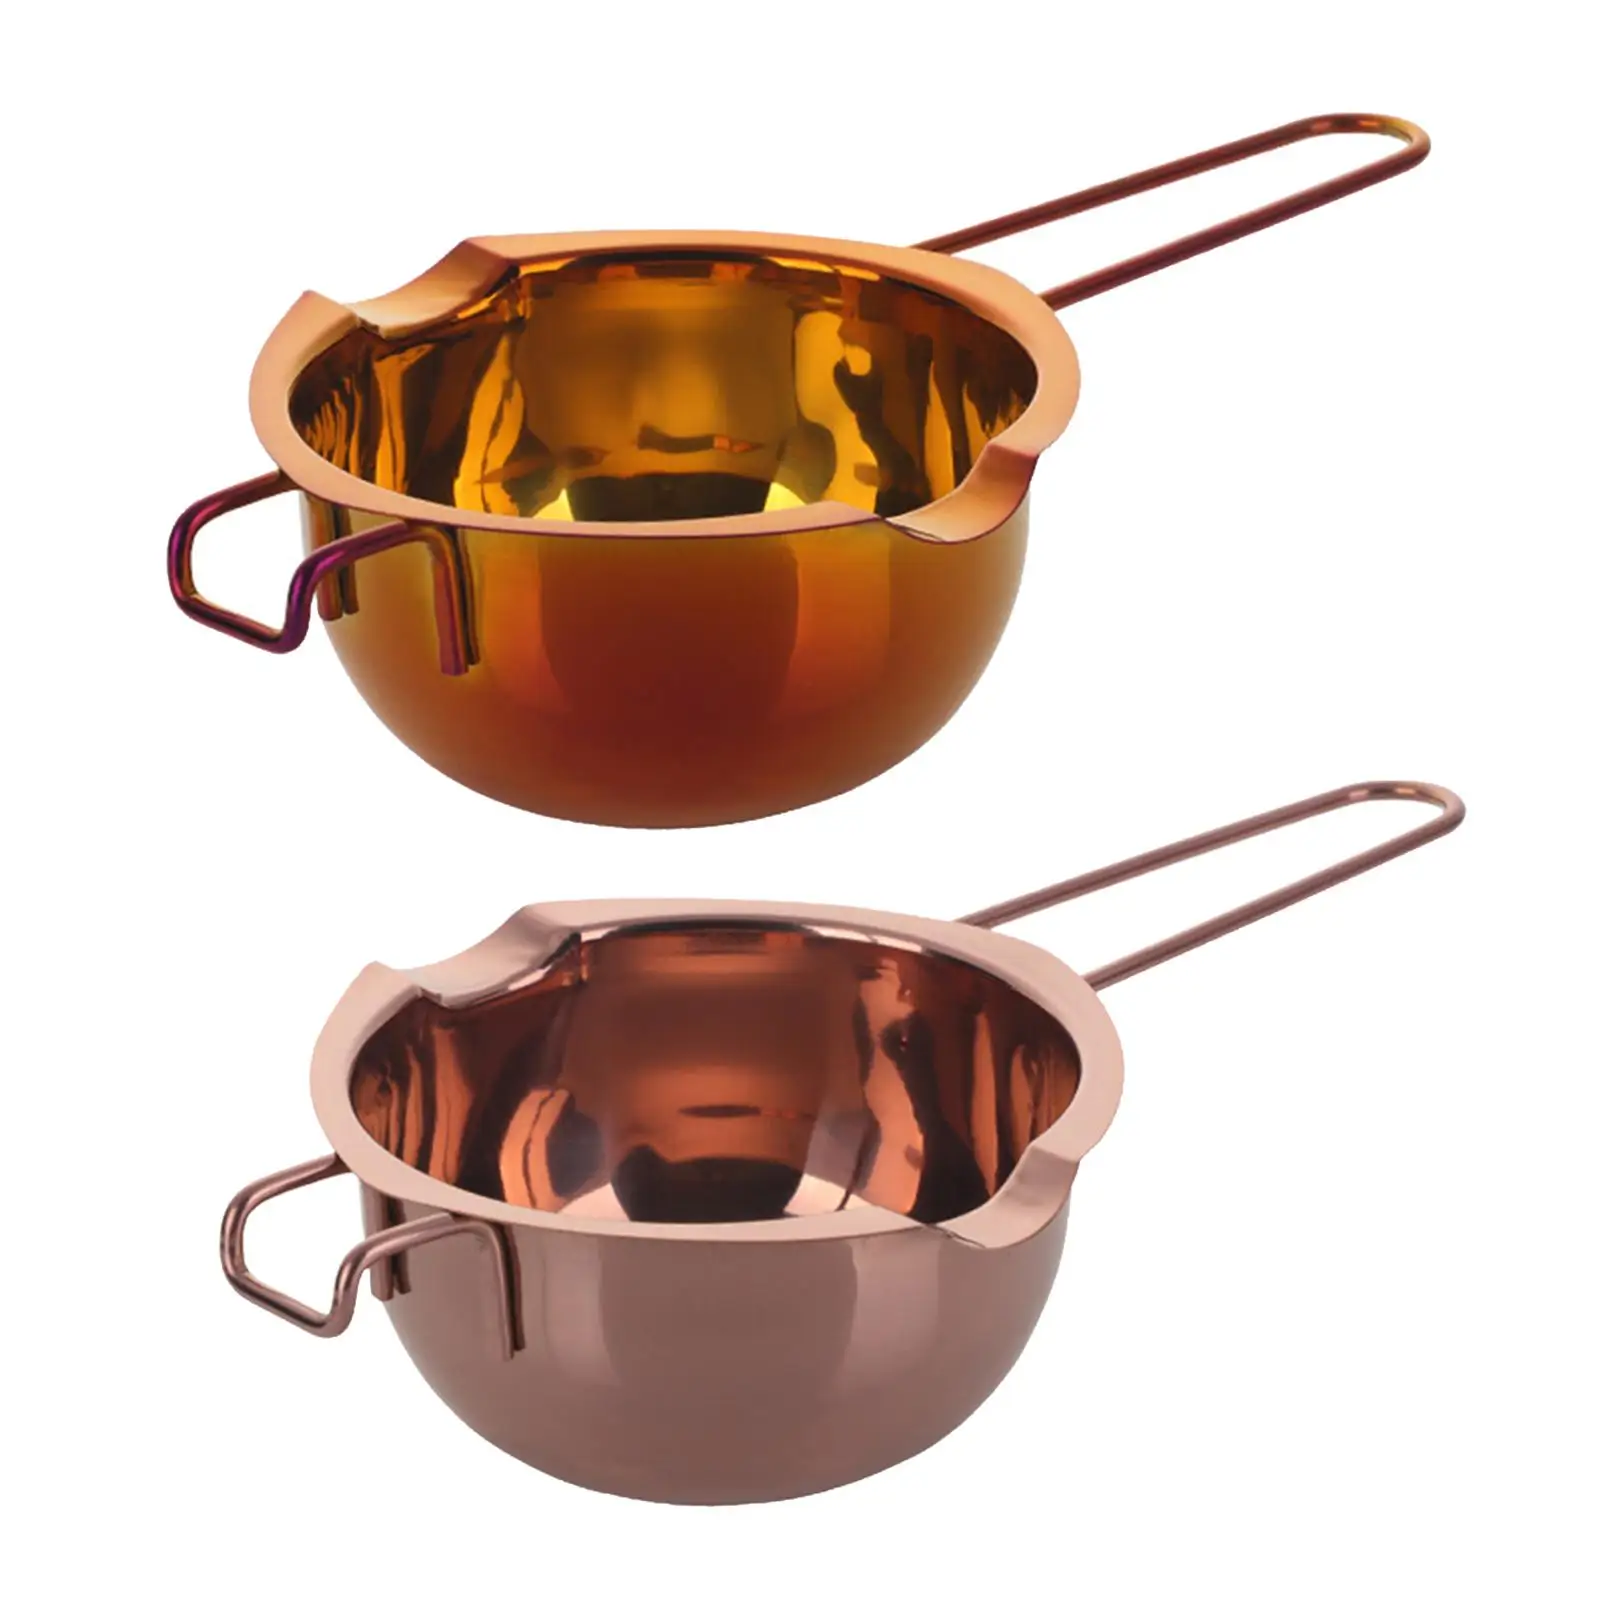 400ml Double Boiler Melting Pot for Melting Chocolate. Essential Cookware.